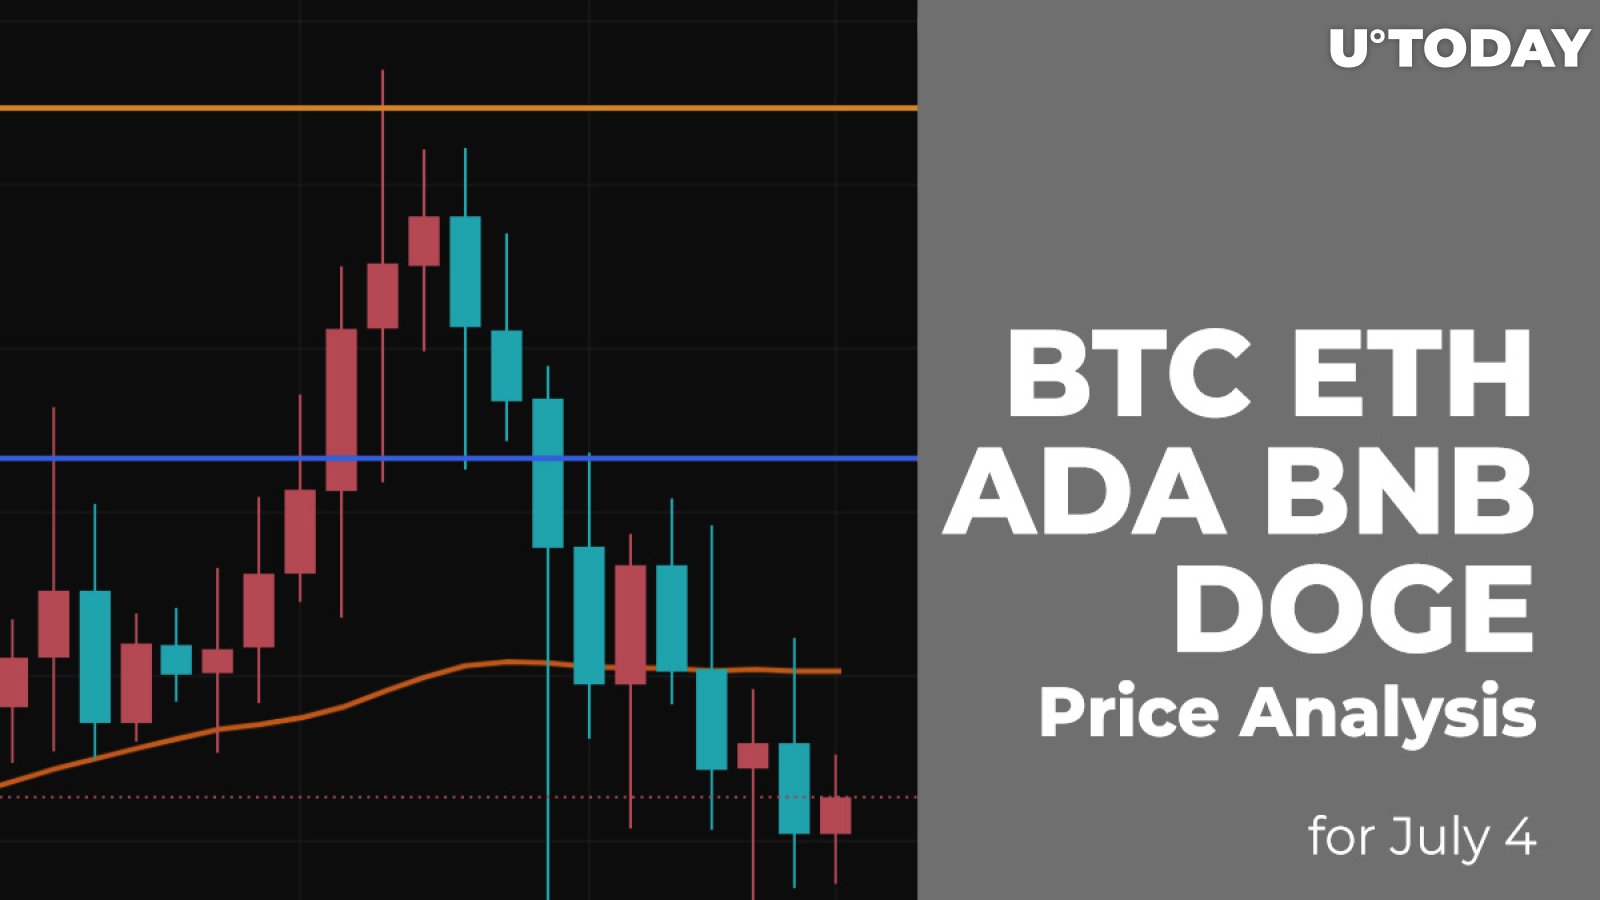 BTC, ETH, ADA, BNB, and DOGE Price Analysis for July 4